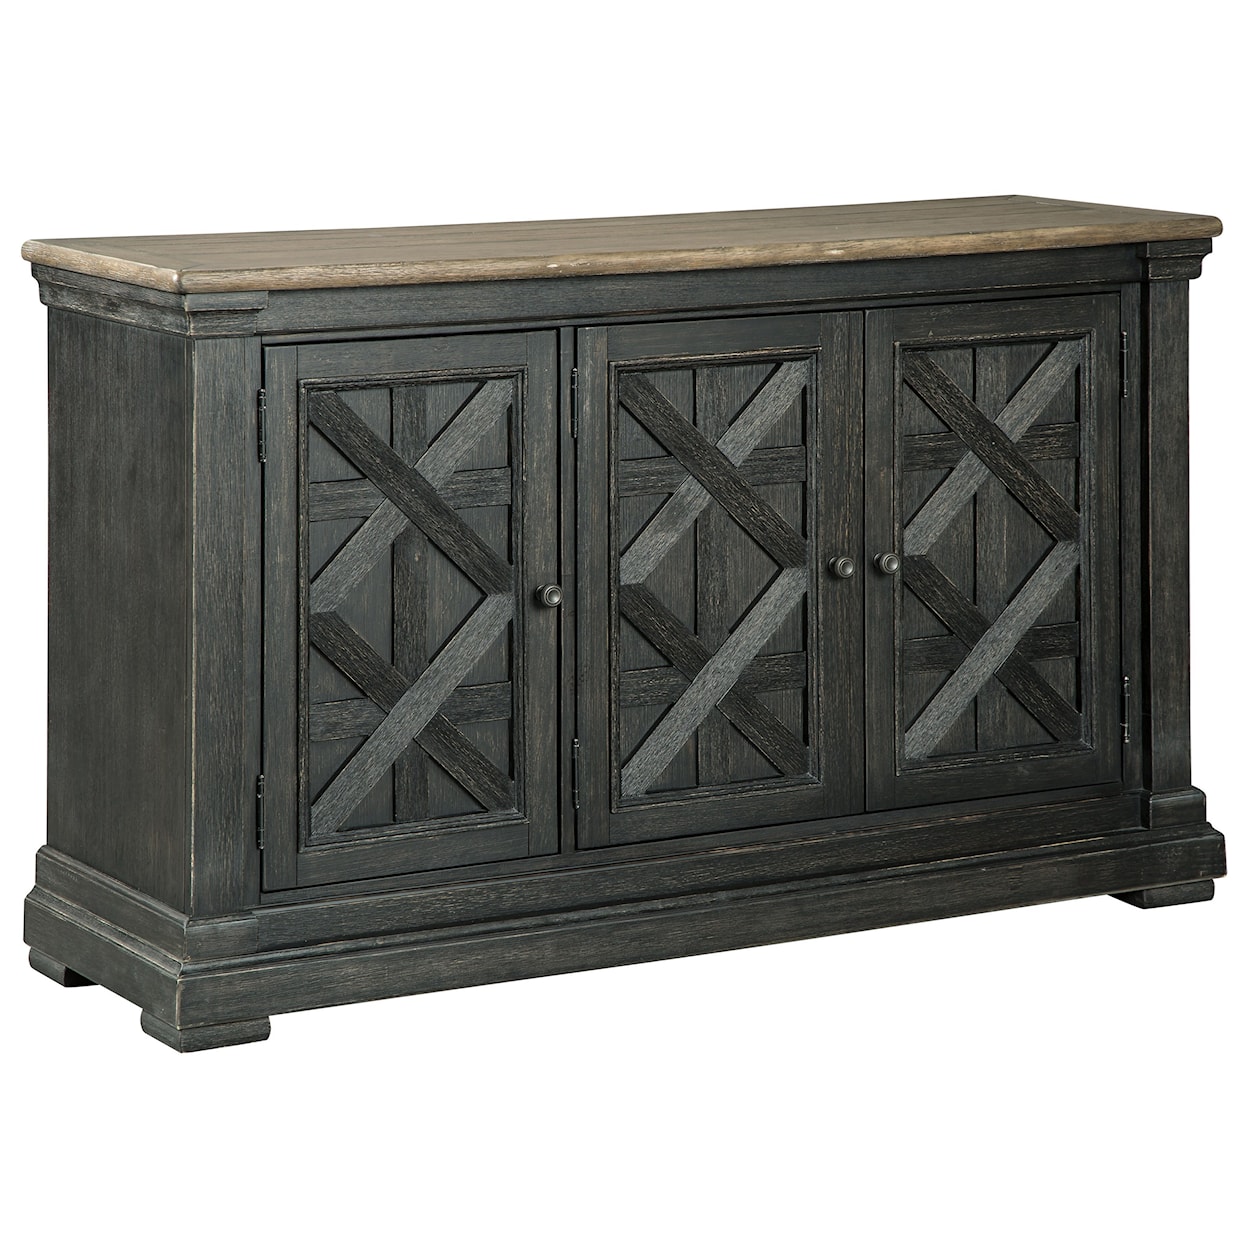 Signature Design by Ashley Tory Dining Room Server